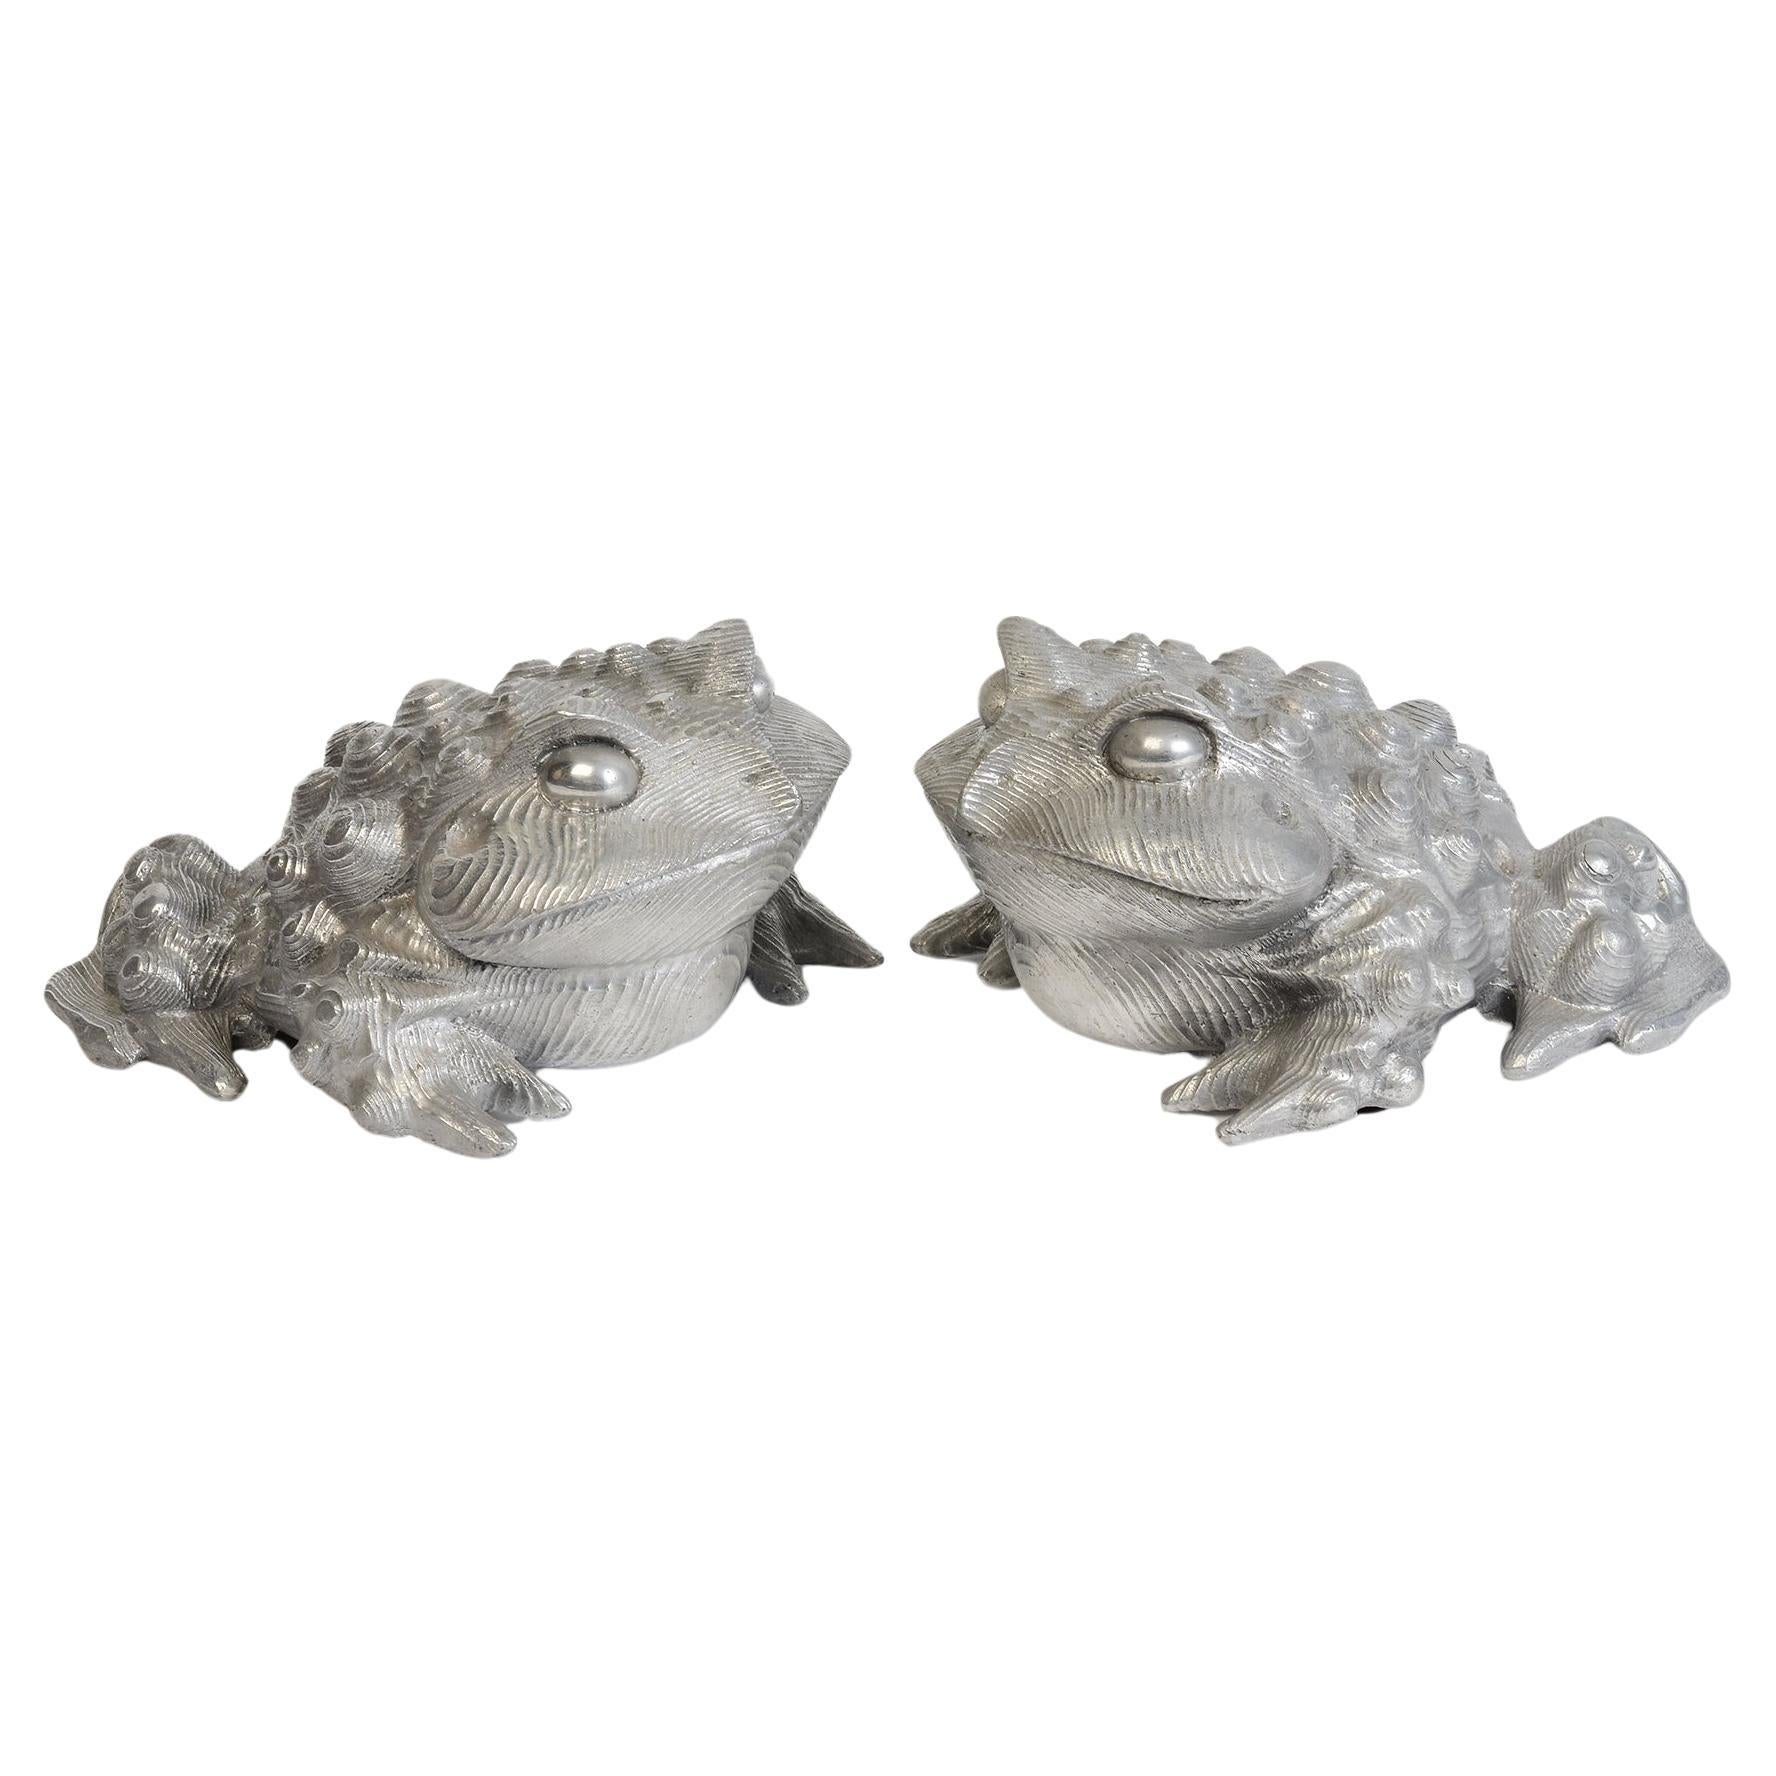 A Pair of Japanese Bronze Toads